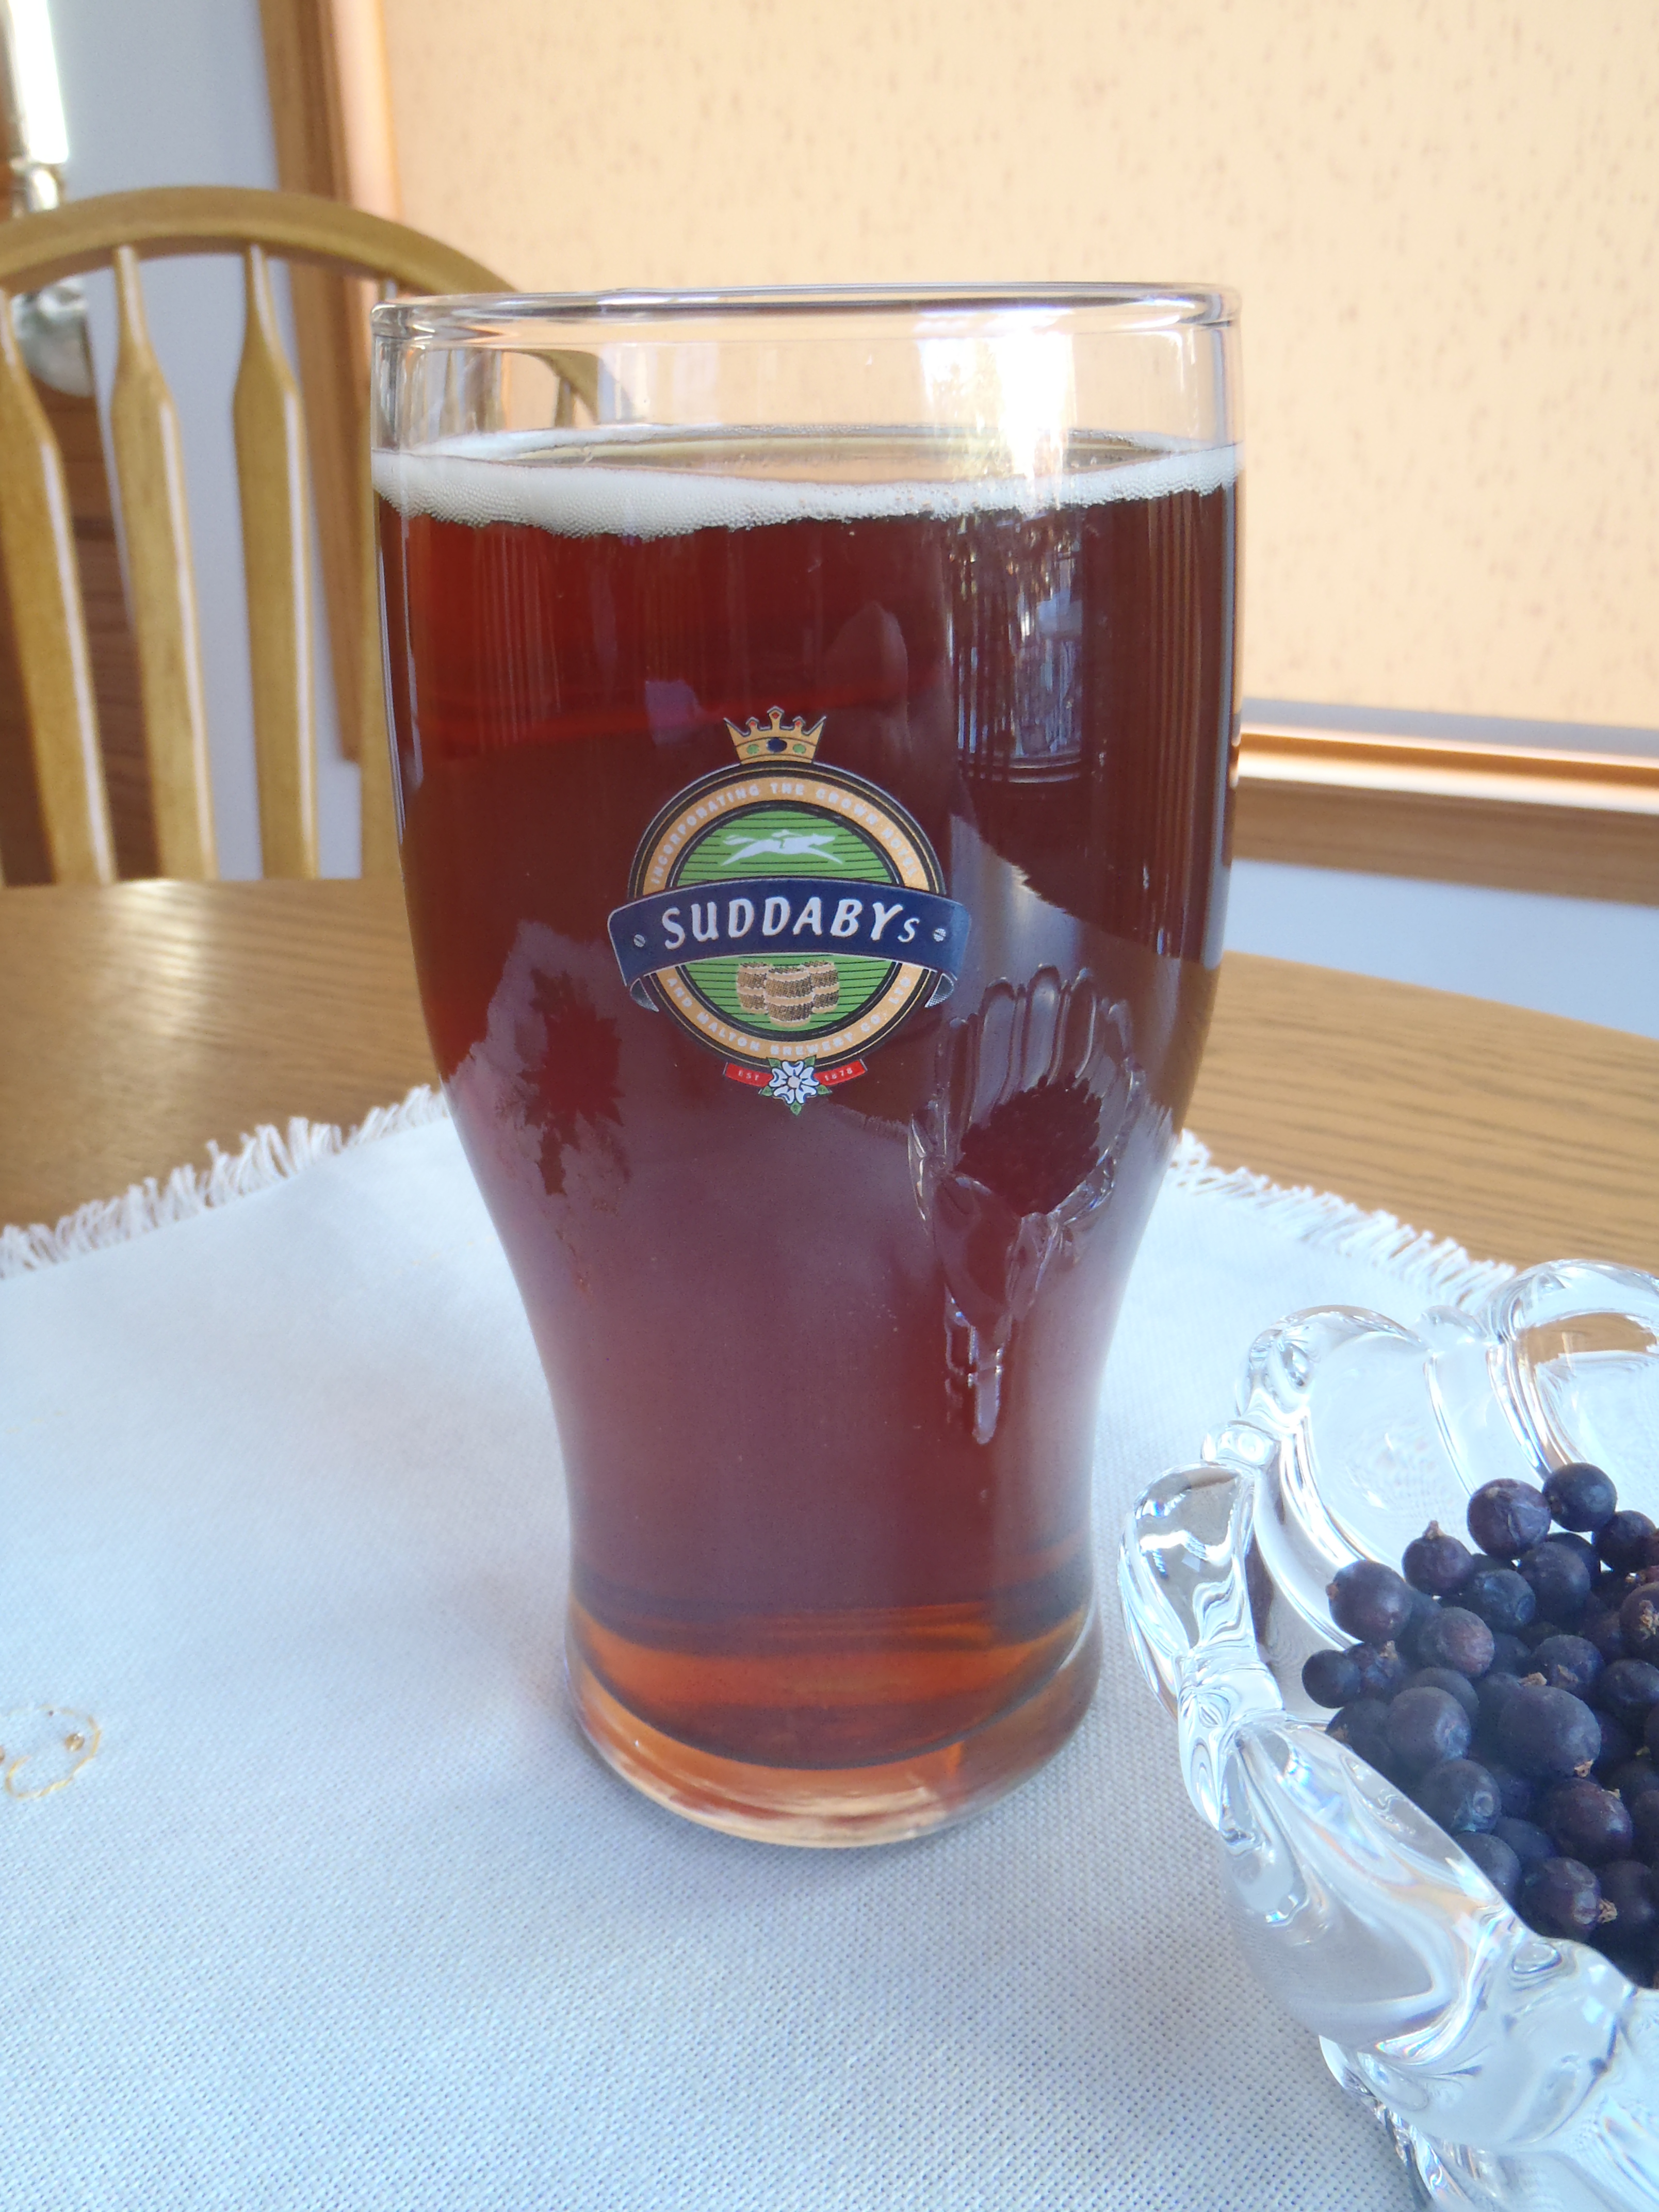 A pint of homebrewed English pale ale